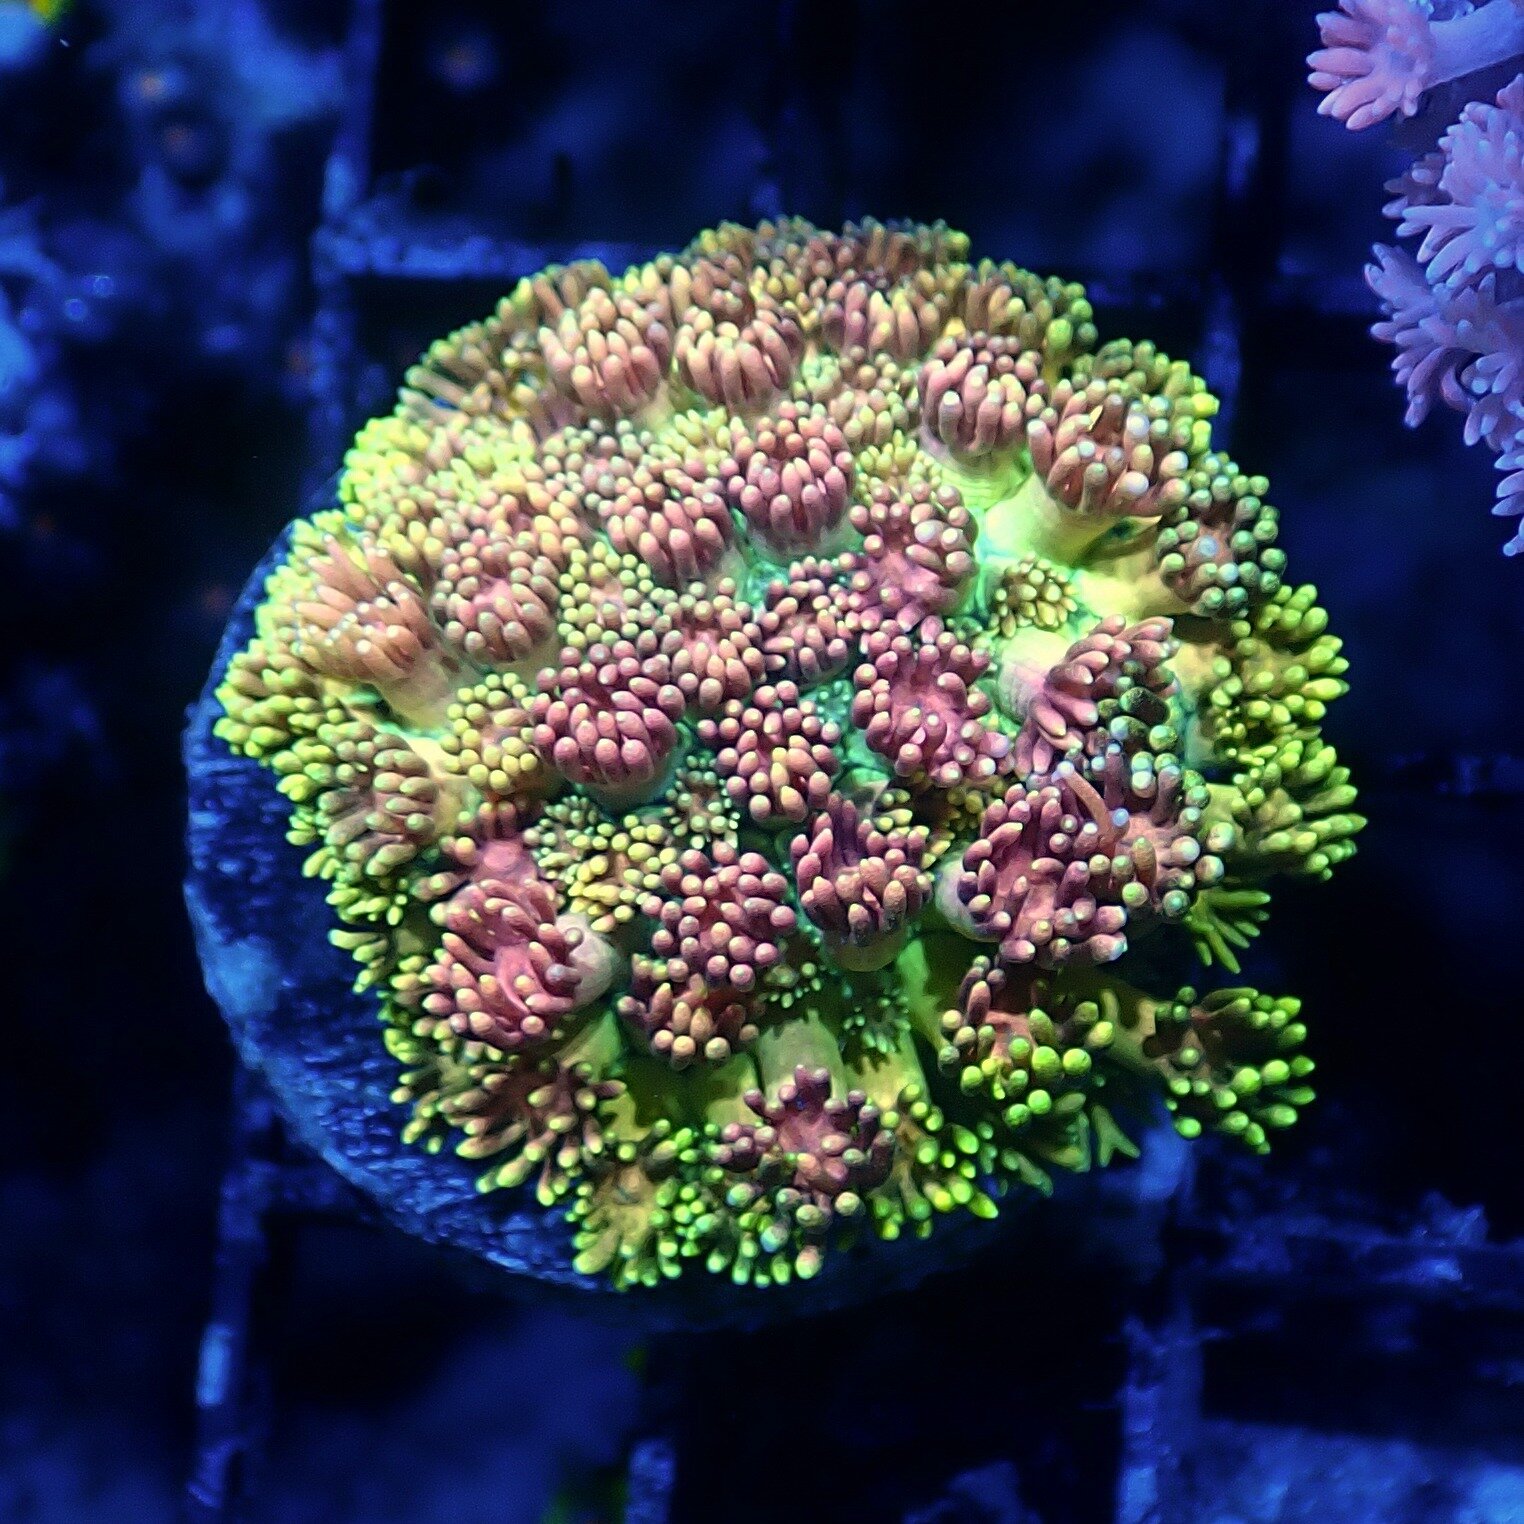 We've got a great mix of high end and $30 Goniopora and Alveopora frags available.  Feed them a couple times a week and they flourish!

 We've got discounts on new torches, Riccordea and flower anemones this week.

Open Fridays 12-5 and Saturdays 10-